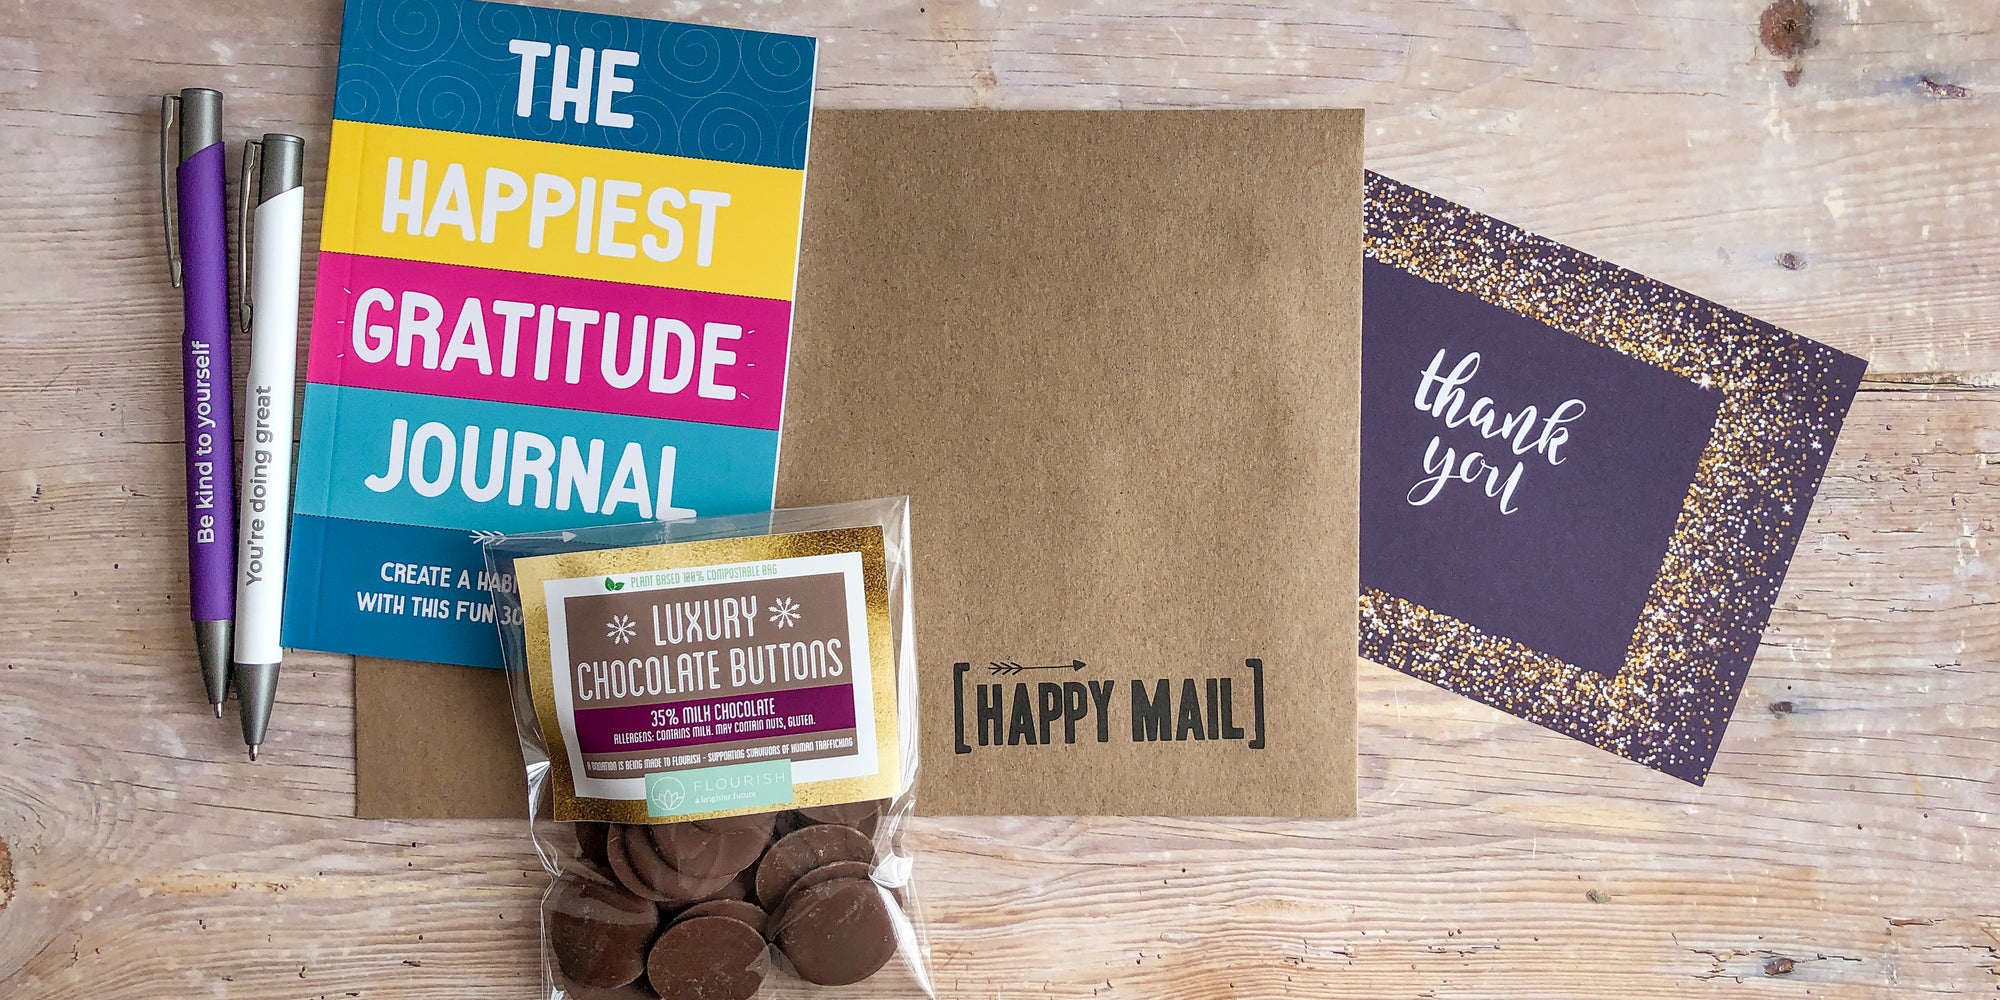 Corporate gifts for employees that focus on mental health and wellbeing.